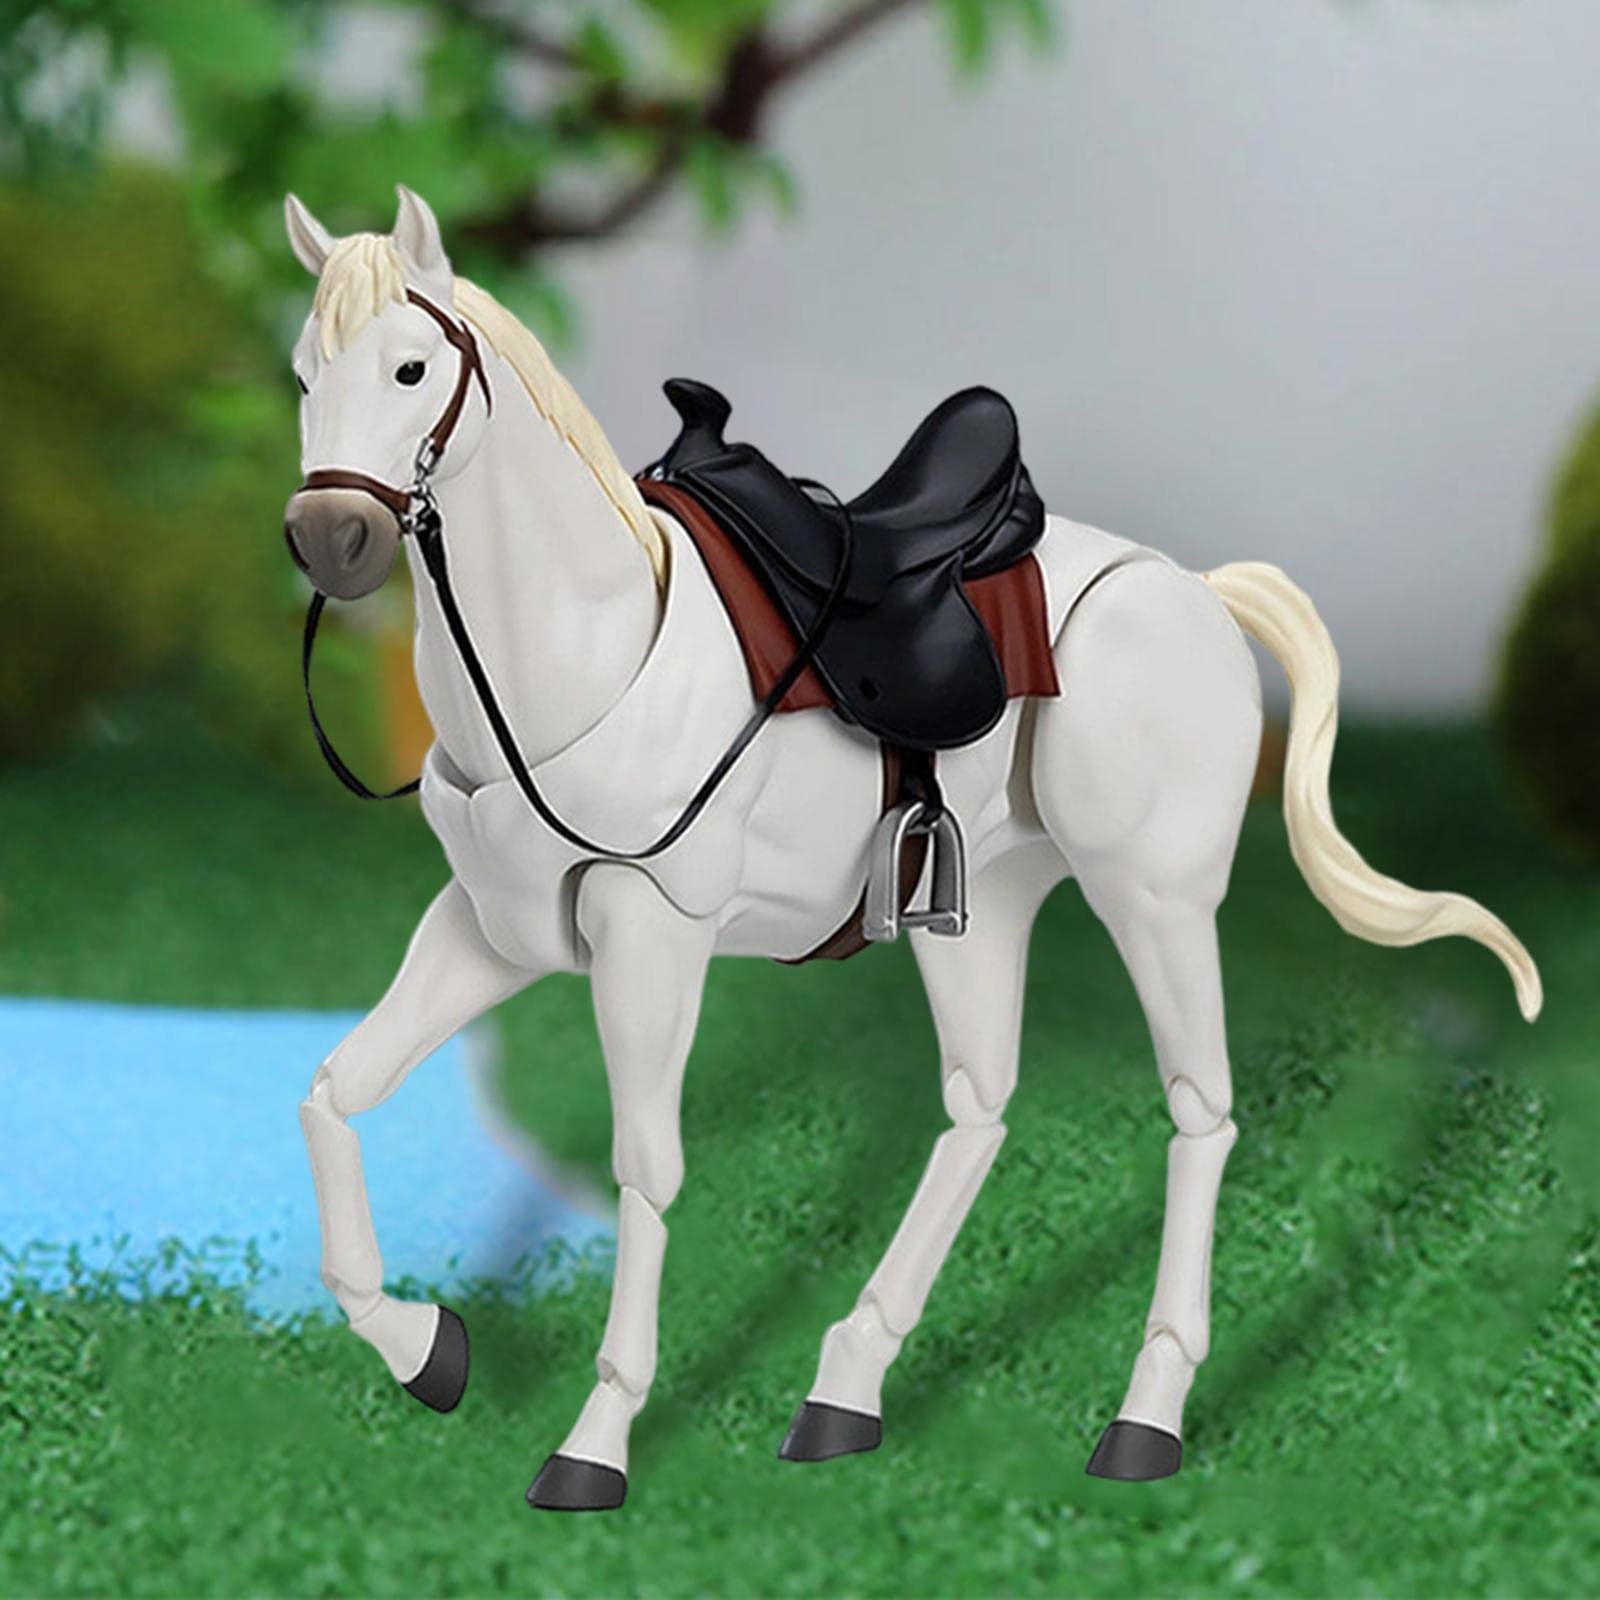 UGPLM 1/12 Scale Action Figures 1/12 Scale Horse Figure Model Collection Home Decor Simulation Realistic Painted Figures 1:12 Scale Animal Figurine, White, 22cm